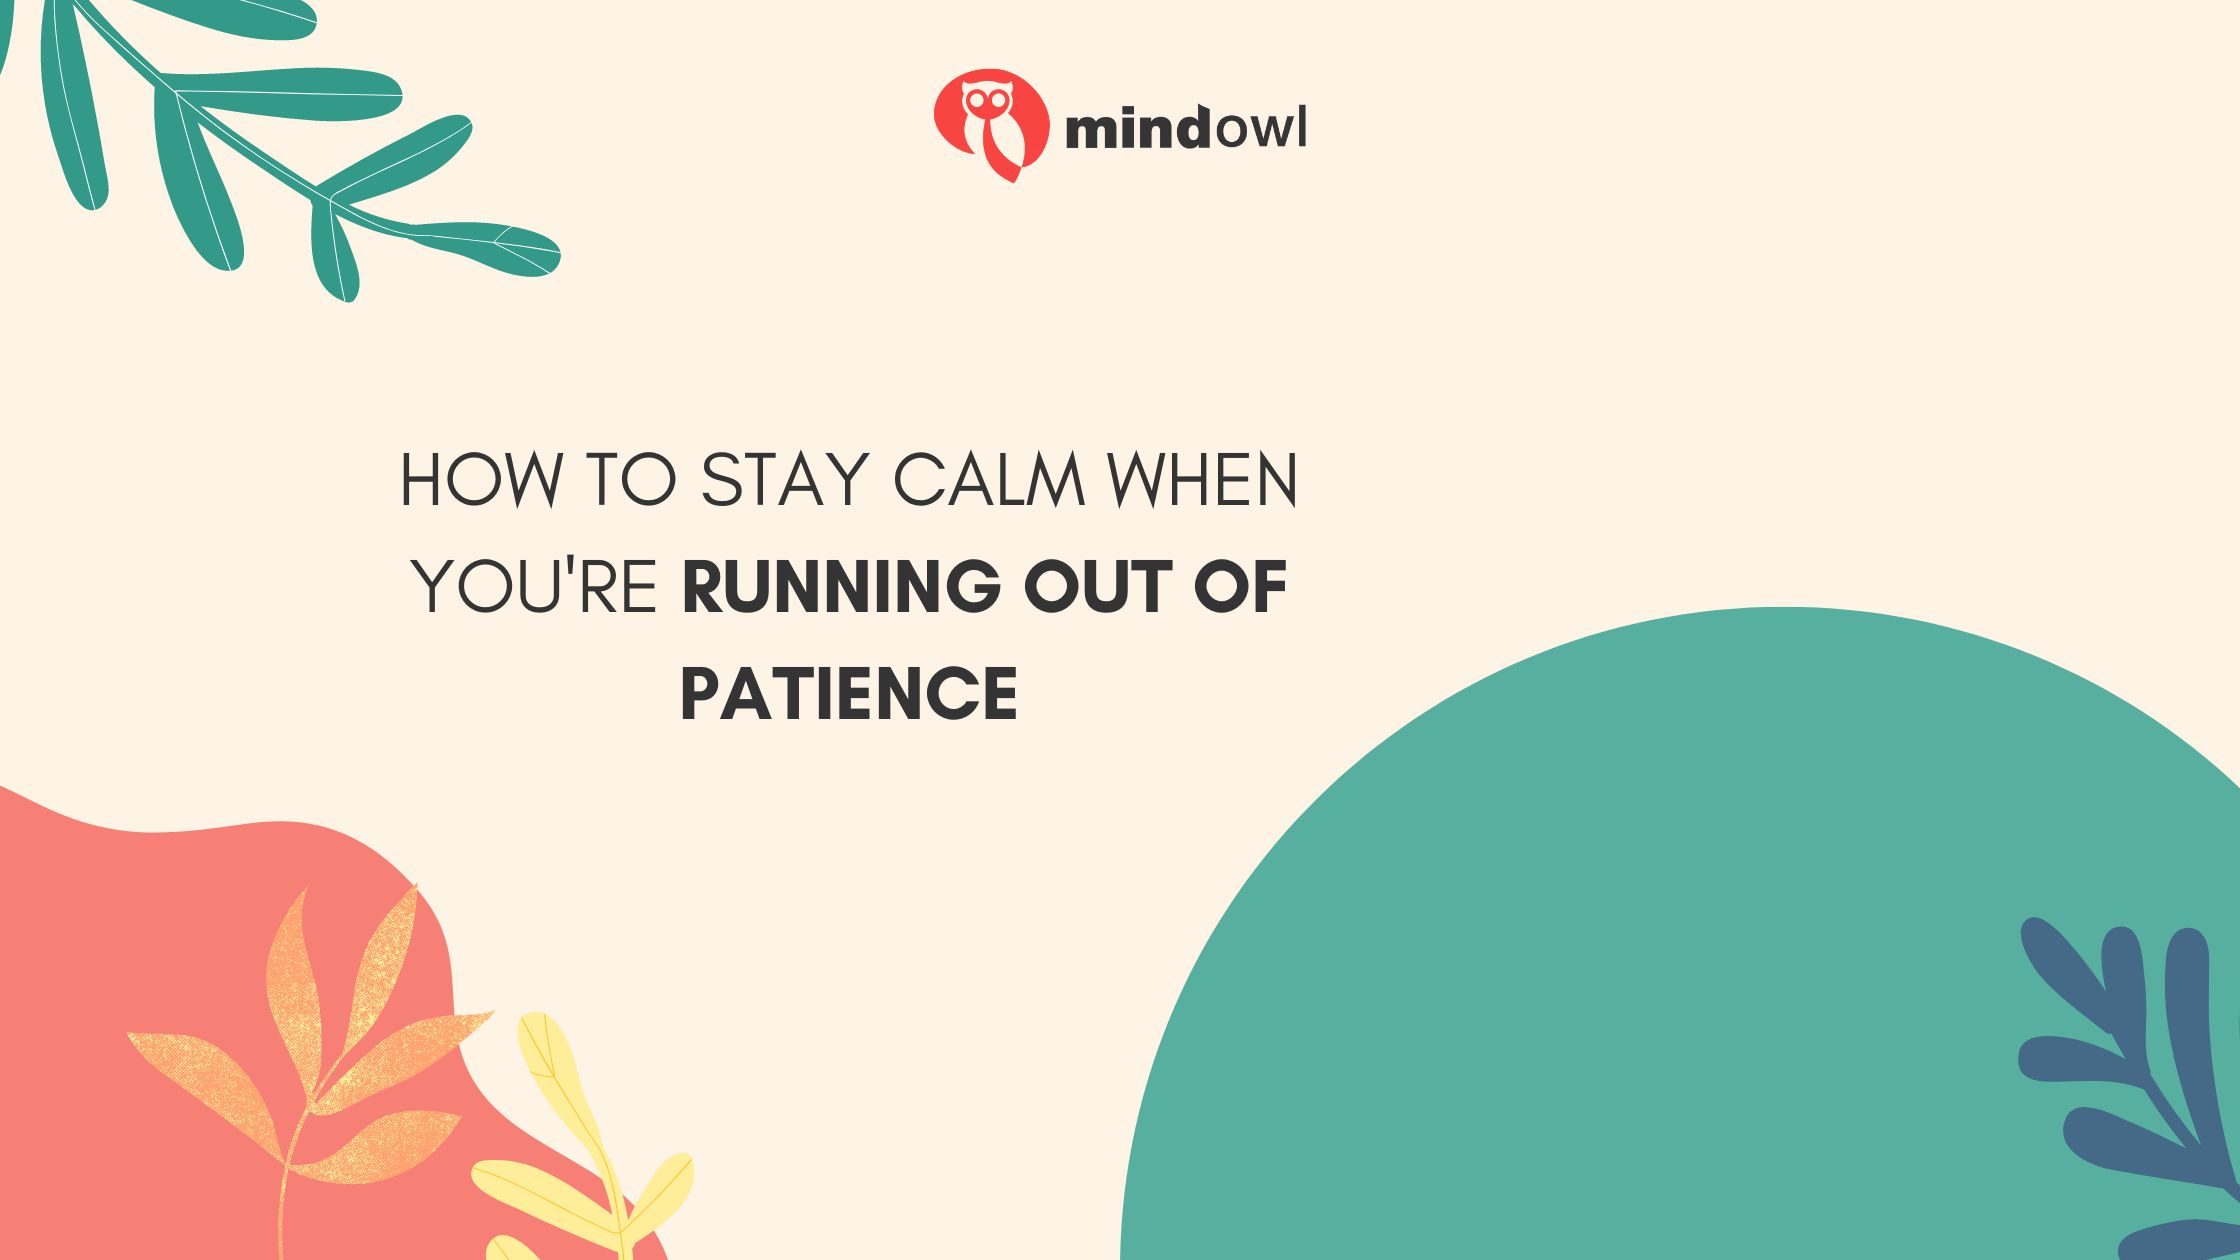 How to Stay Calm When You’re Running Out of Patience